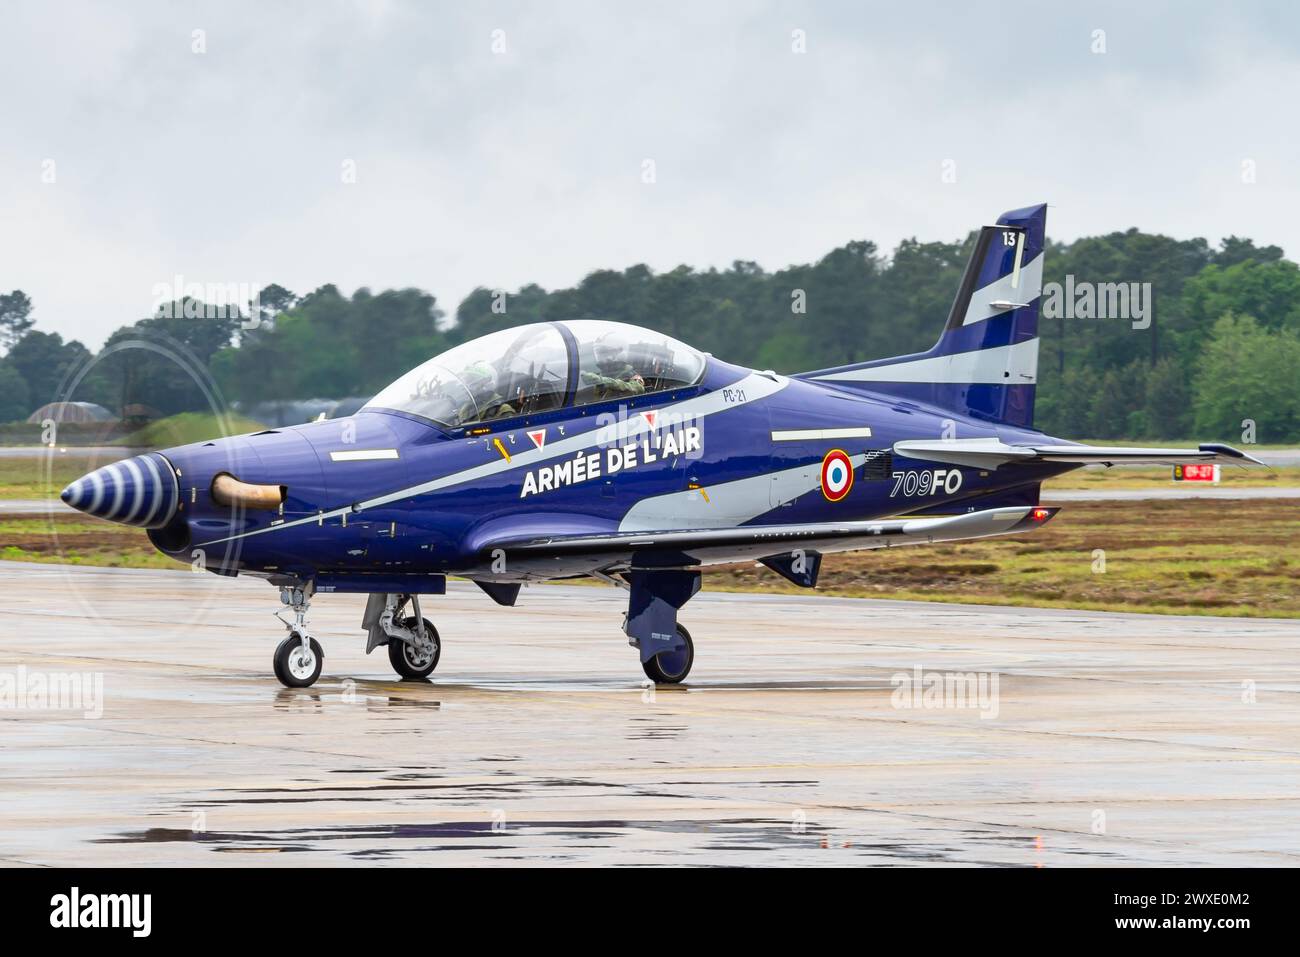 A Pilatus PC-21 advanced trainer aircraft of the French Air and Space Force. Stock Photo